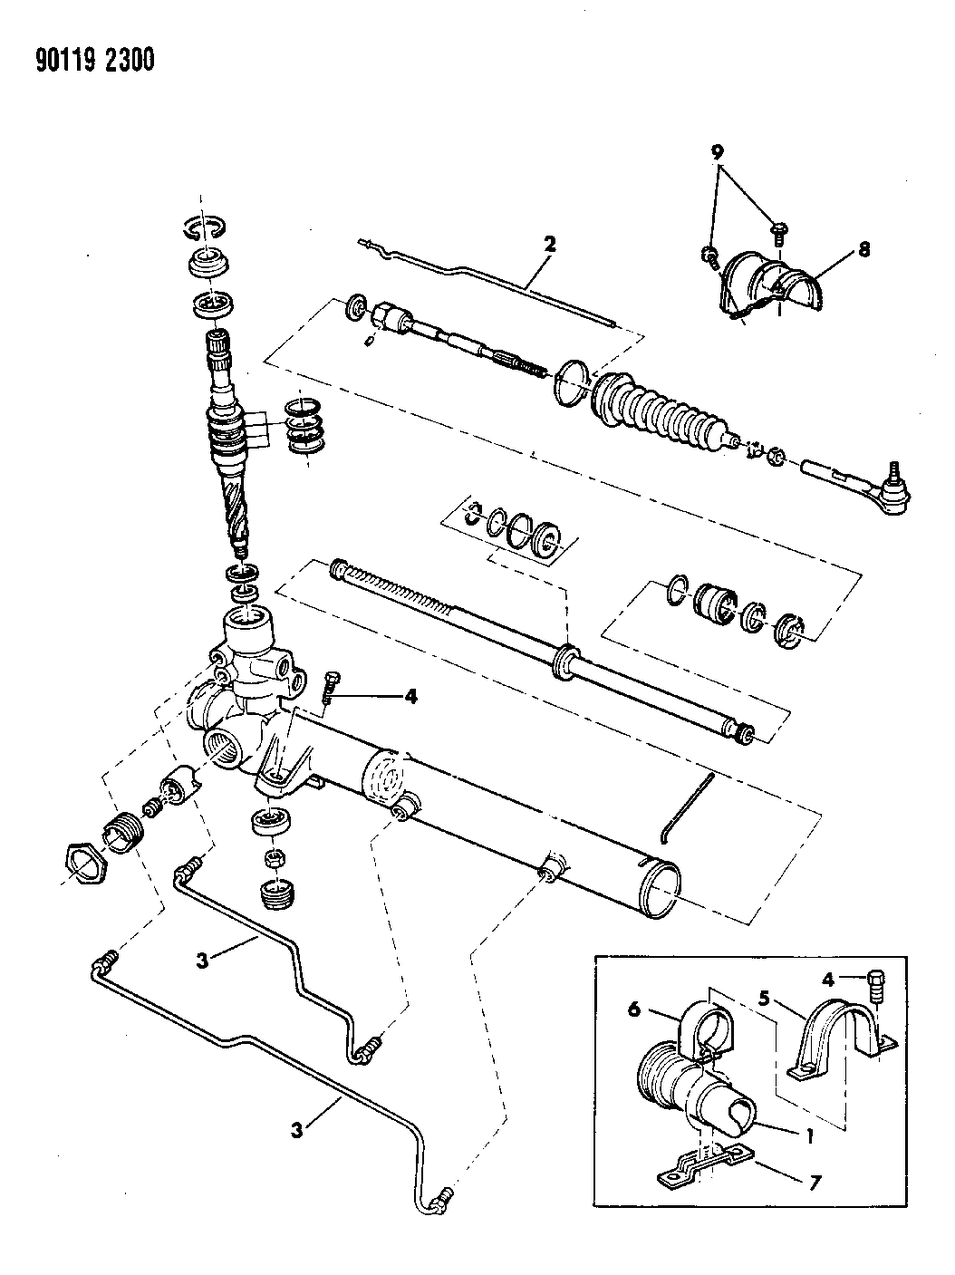 Mopar 4470858 Gear, Rack And Pinion Assembly W/Tie Rods Ends